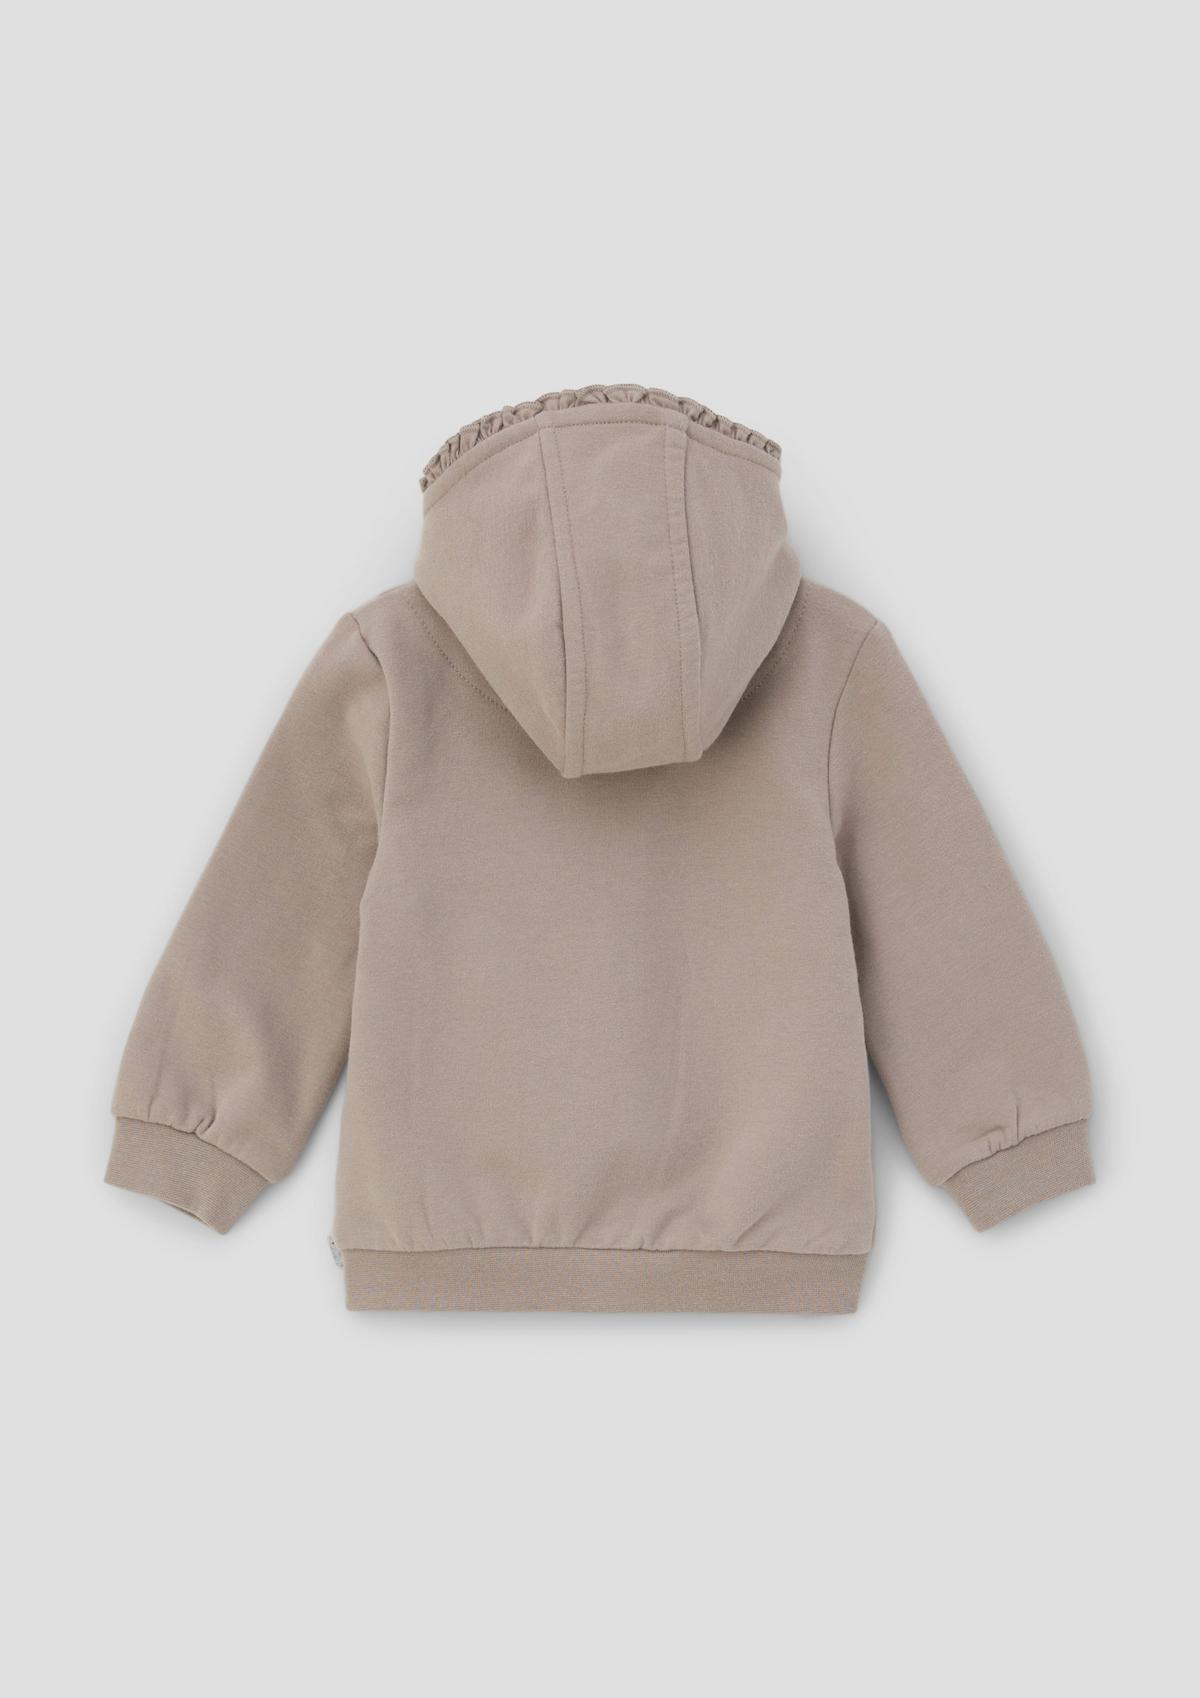 s.Oliver Hooded sweatshirt with ruffle details